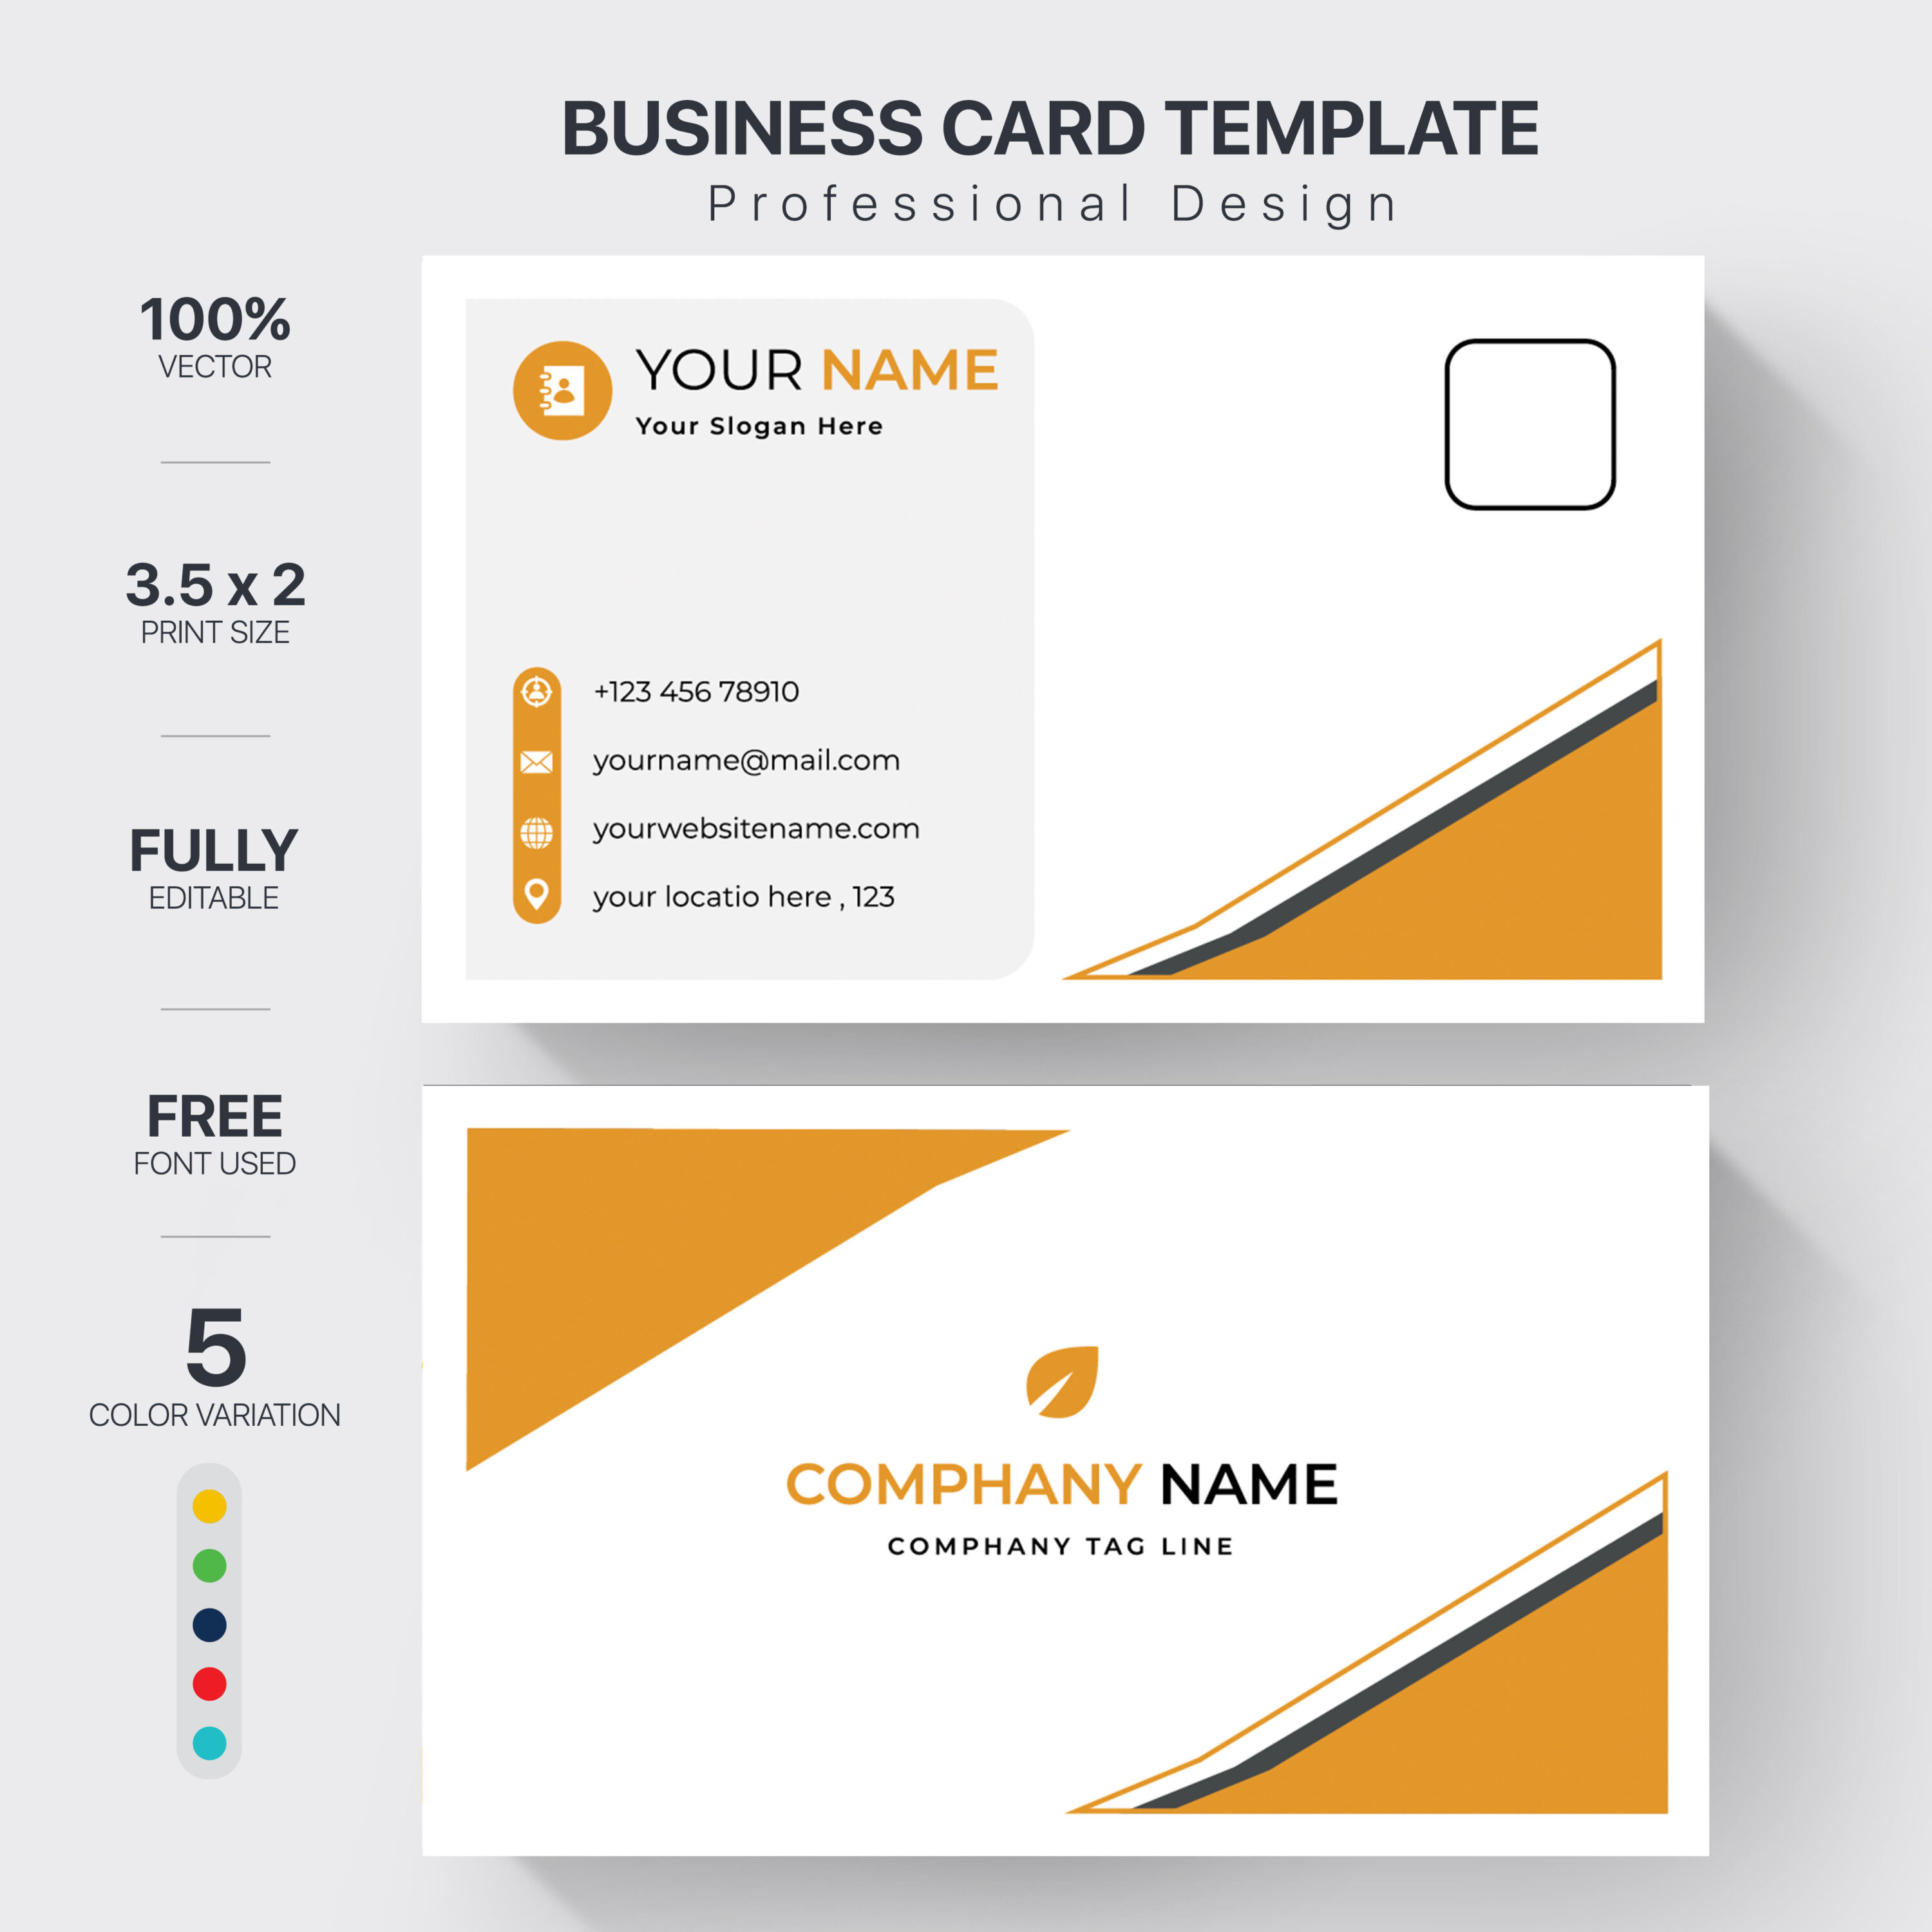 Charming image of double-sided business card template in white and yellow colors.